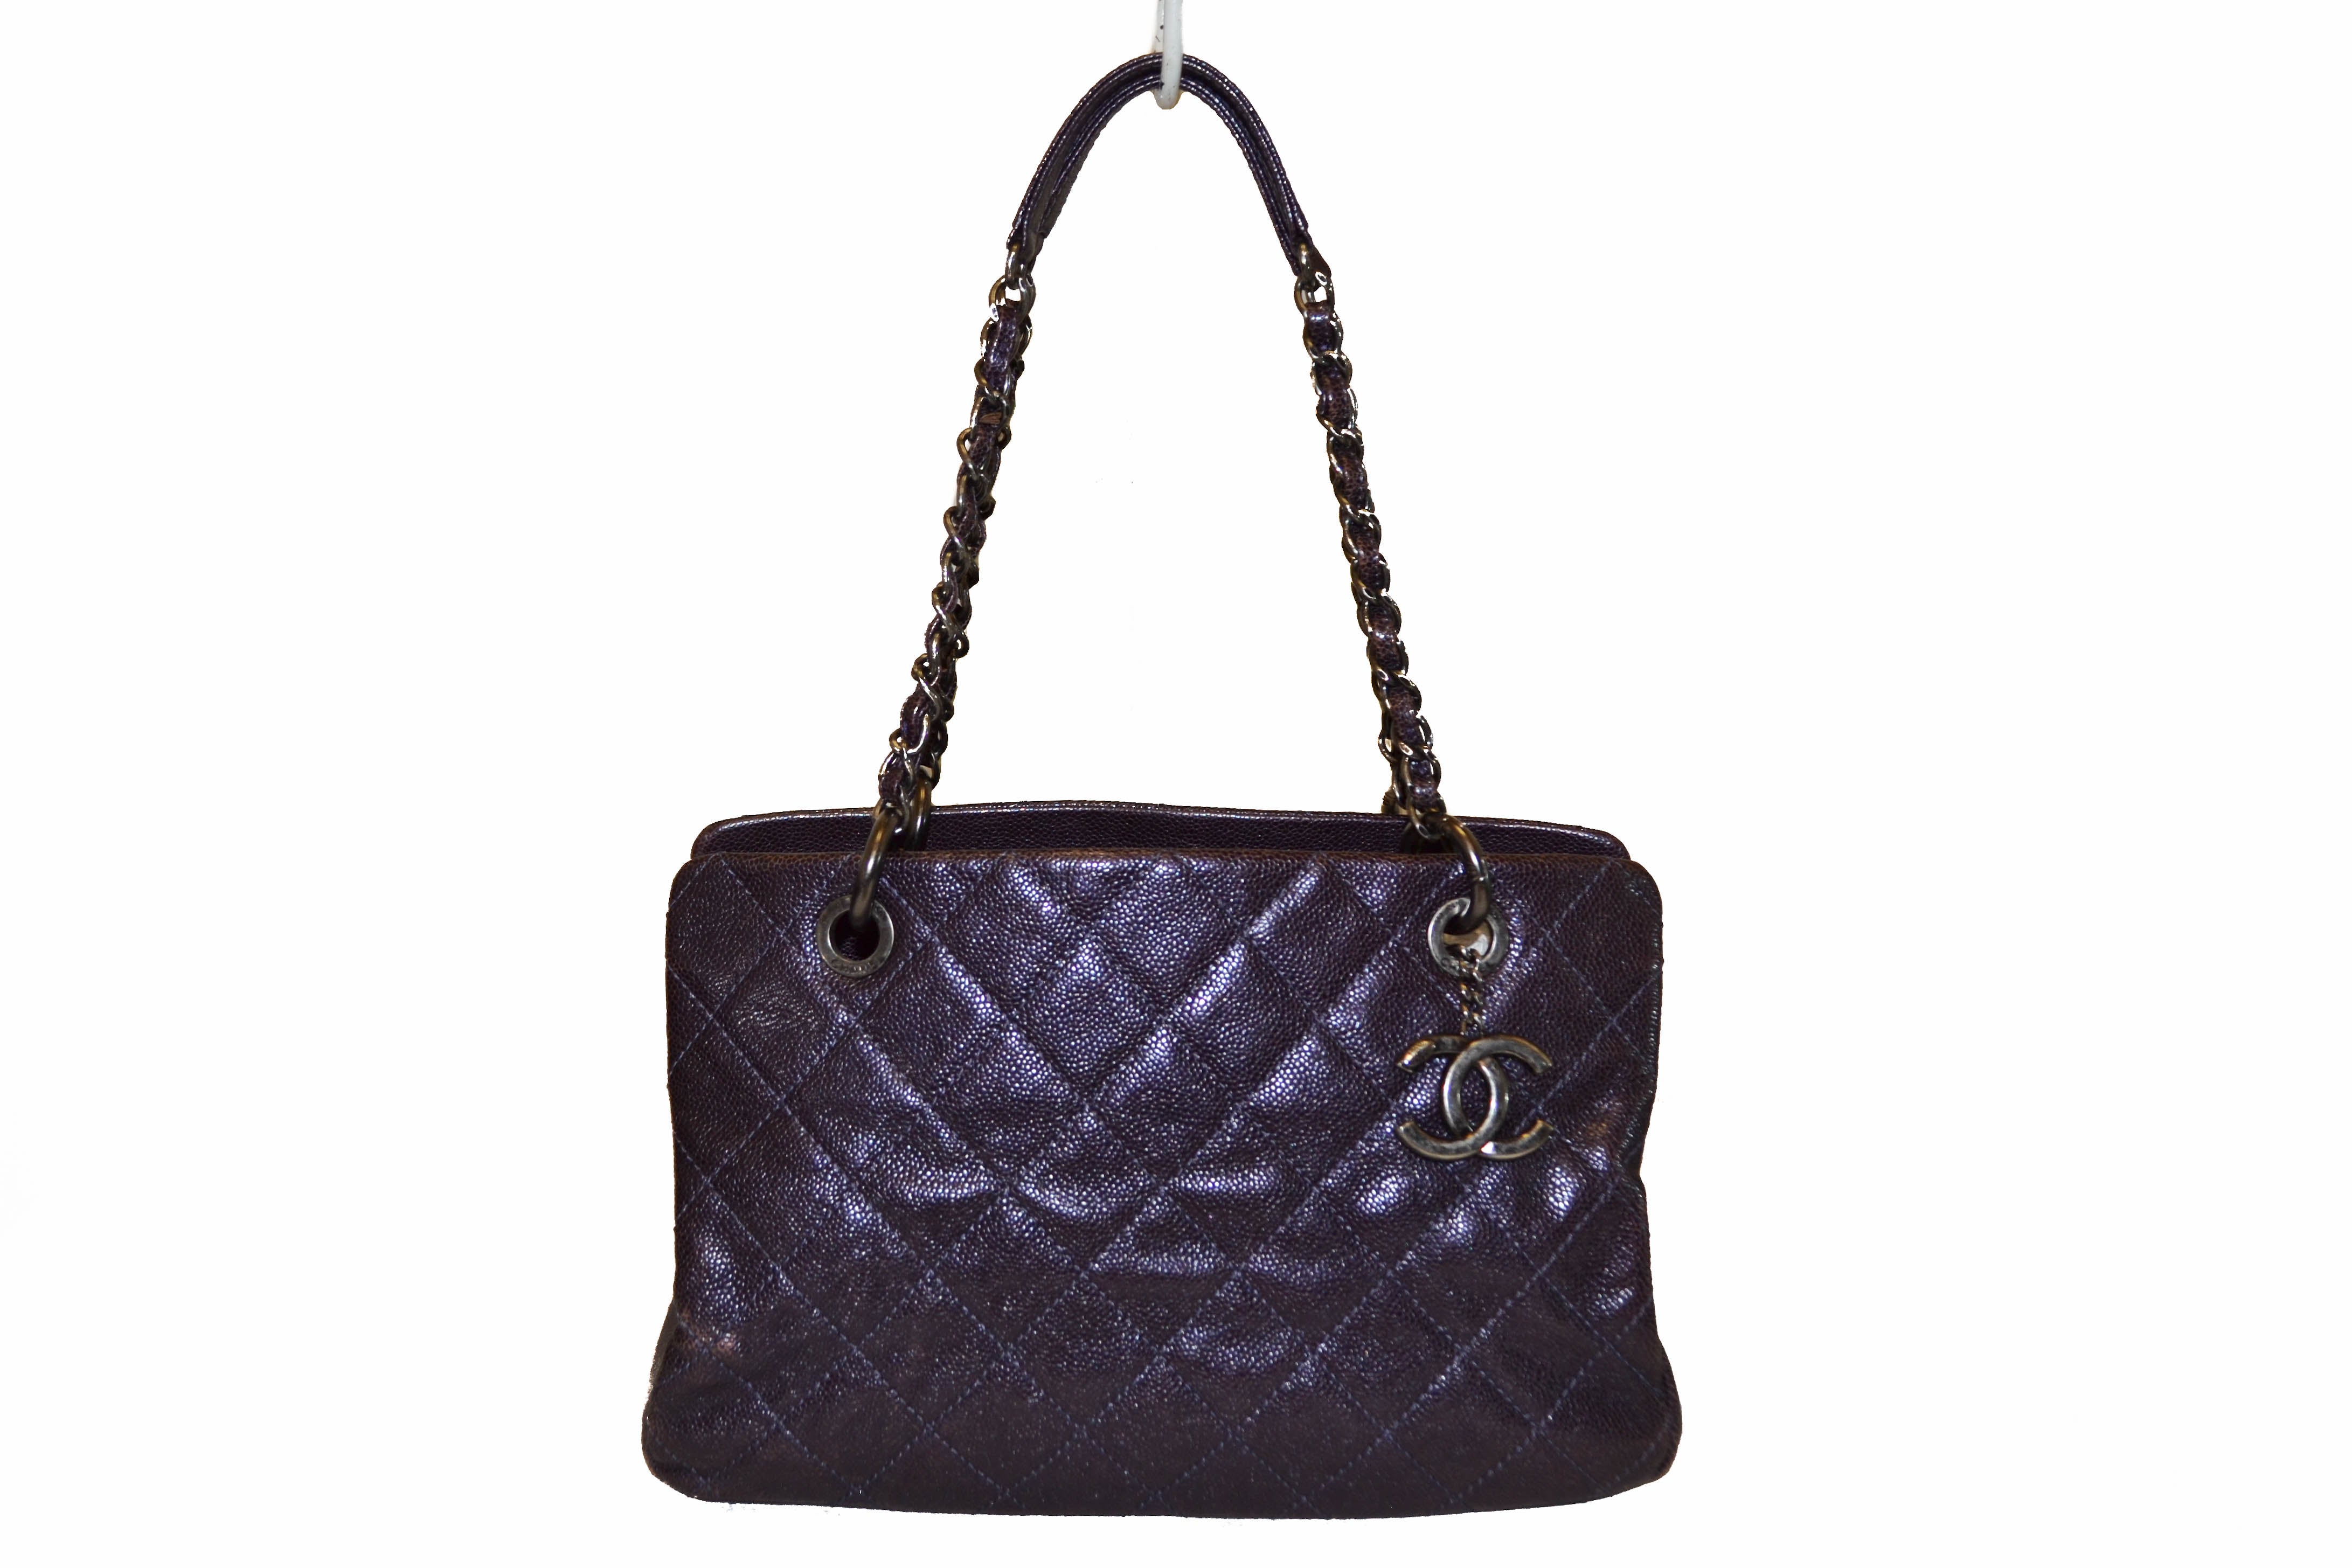 Authentic Chanel Quilted Caviar Leather Metallic Purple Shoulder Bag